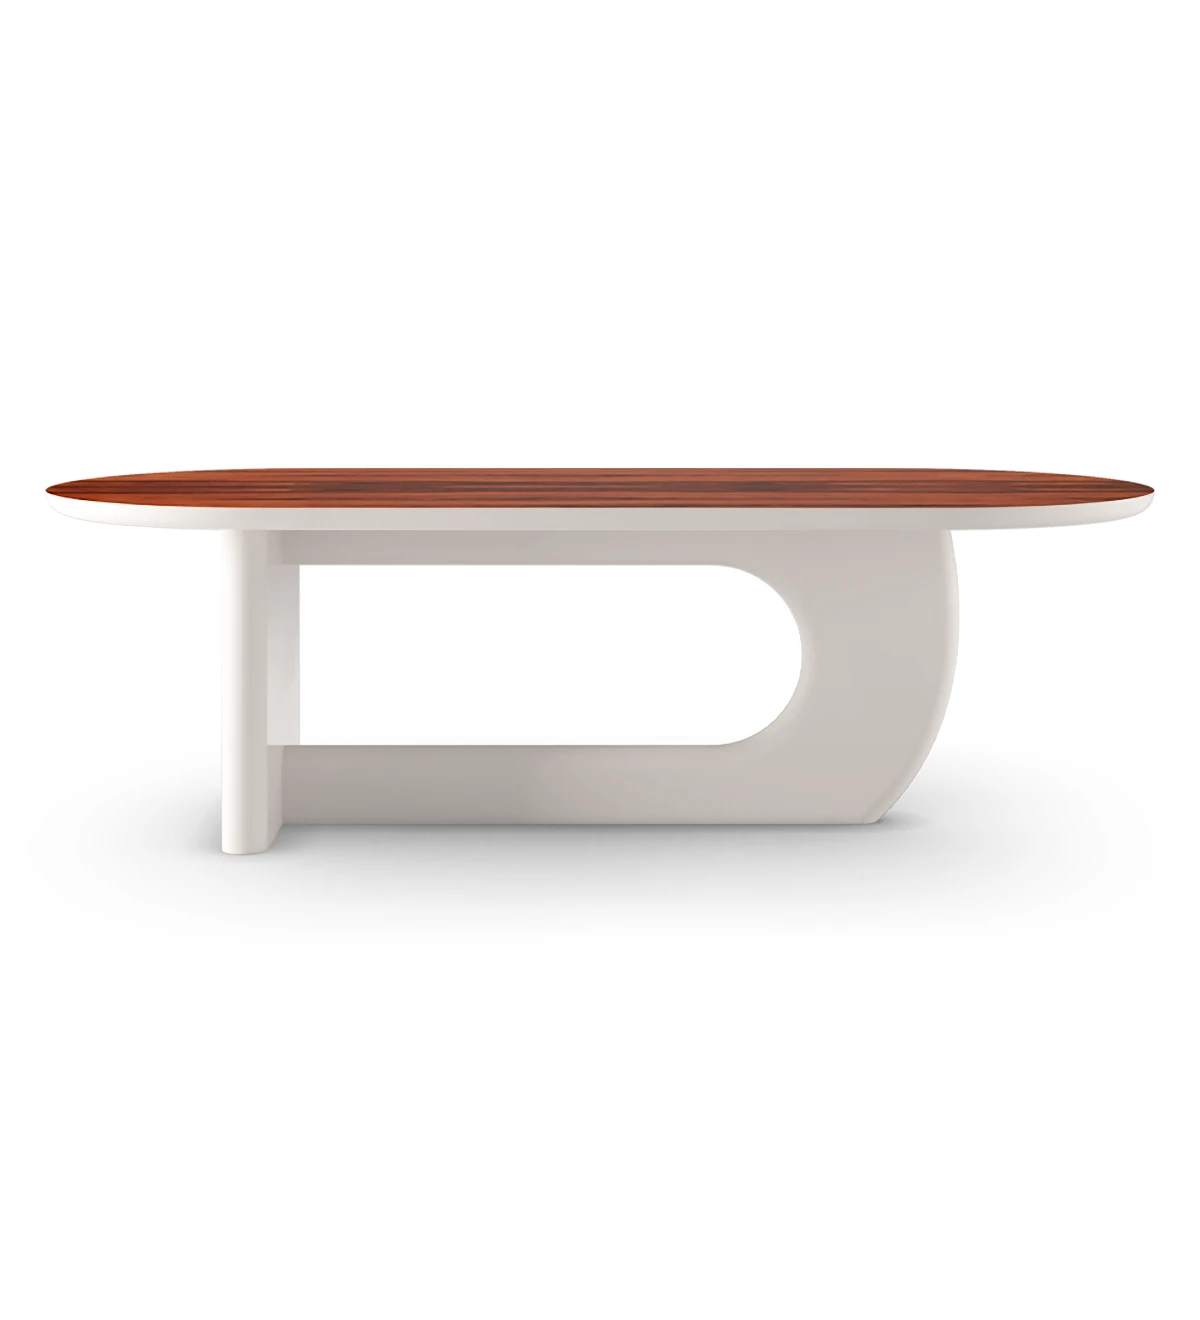 Mónaco oval dining table 200 x 105 cm, high gloss palissander top, pearl lacquered foot.